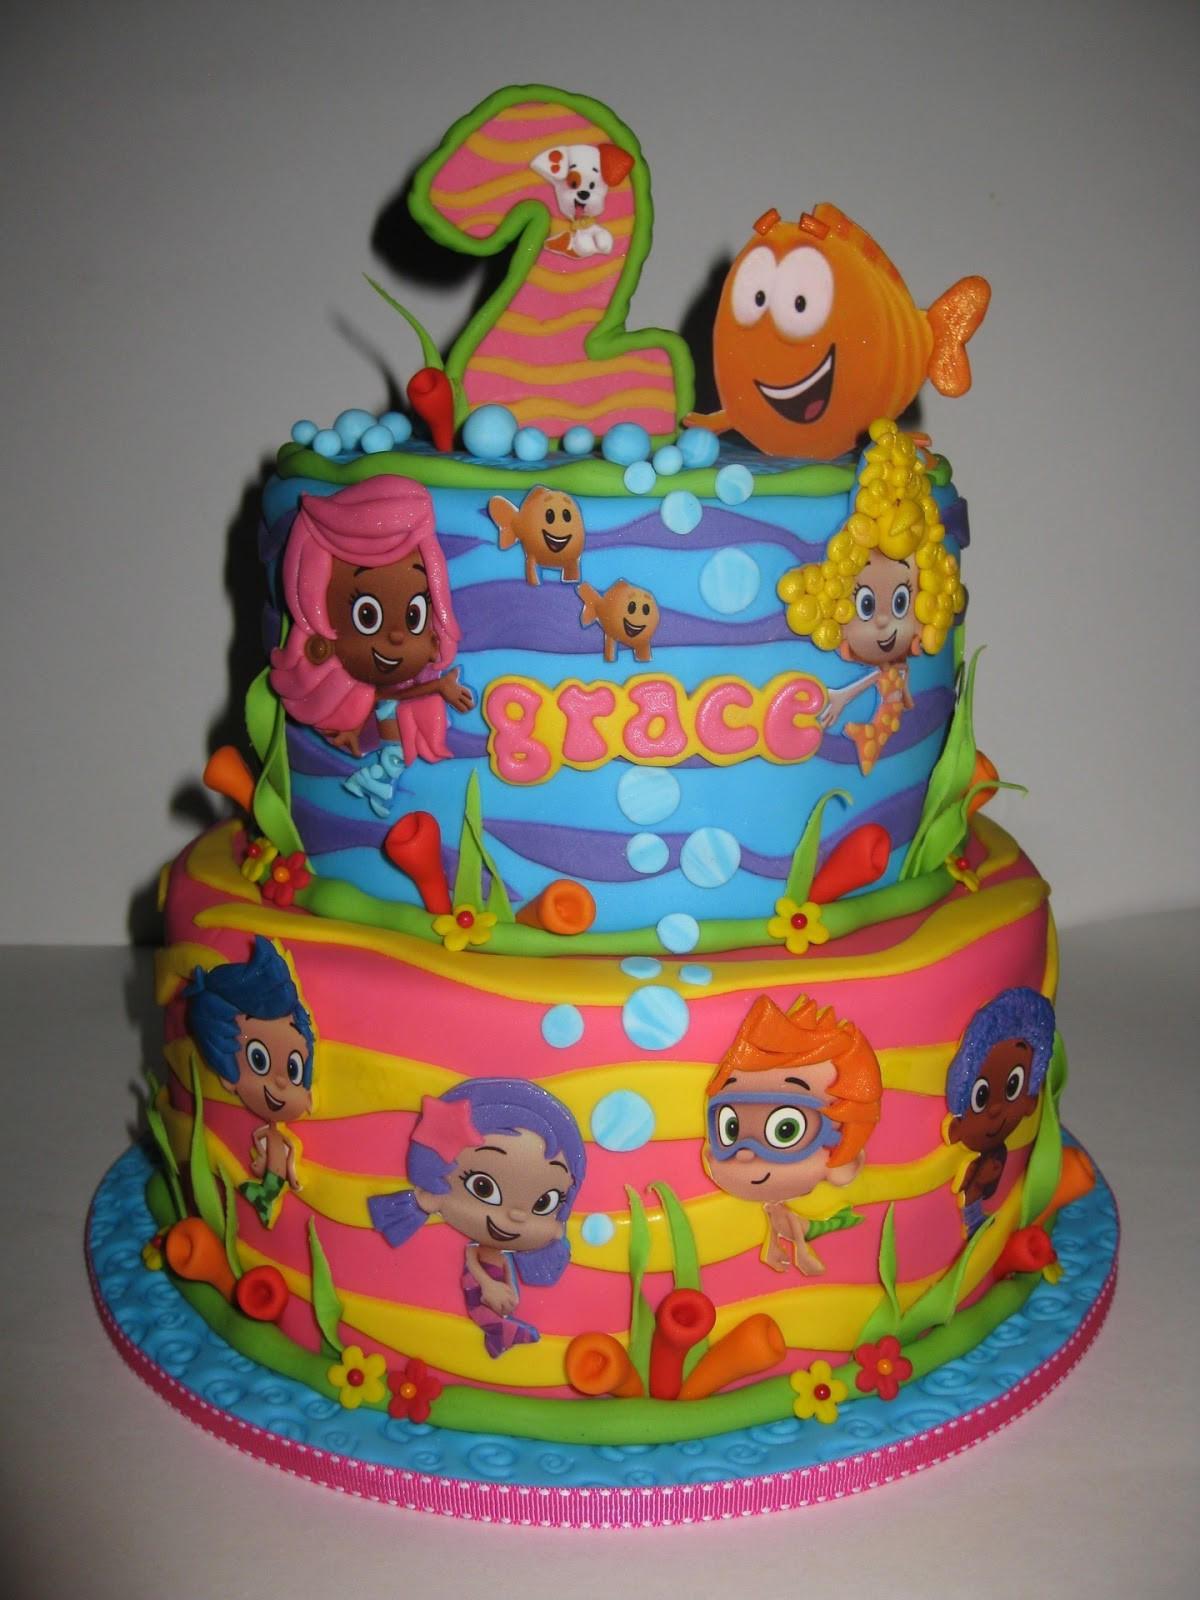 Bubble Guppies Birthday Cakes
 Bubble Guppies Birthday Cake Ideas and Inspiration